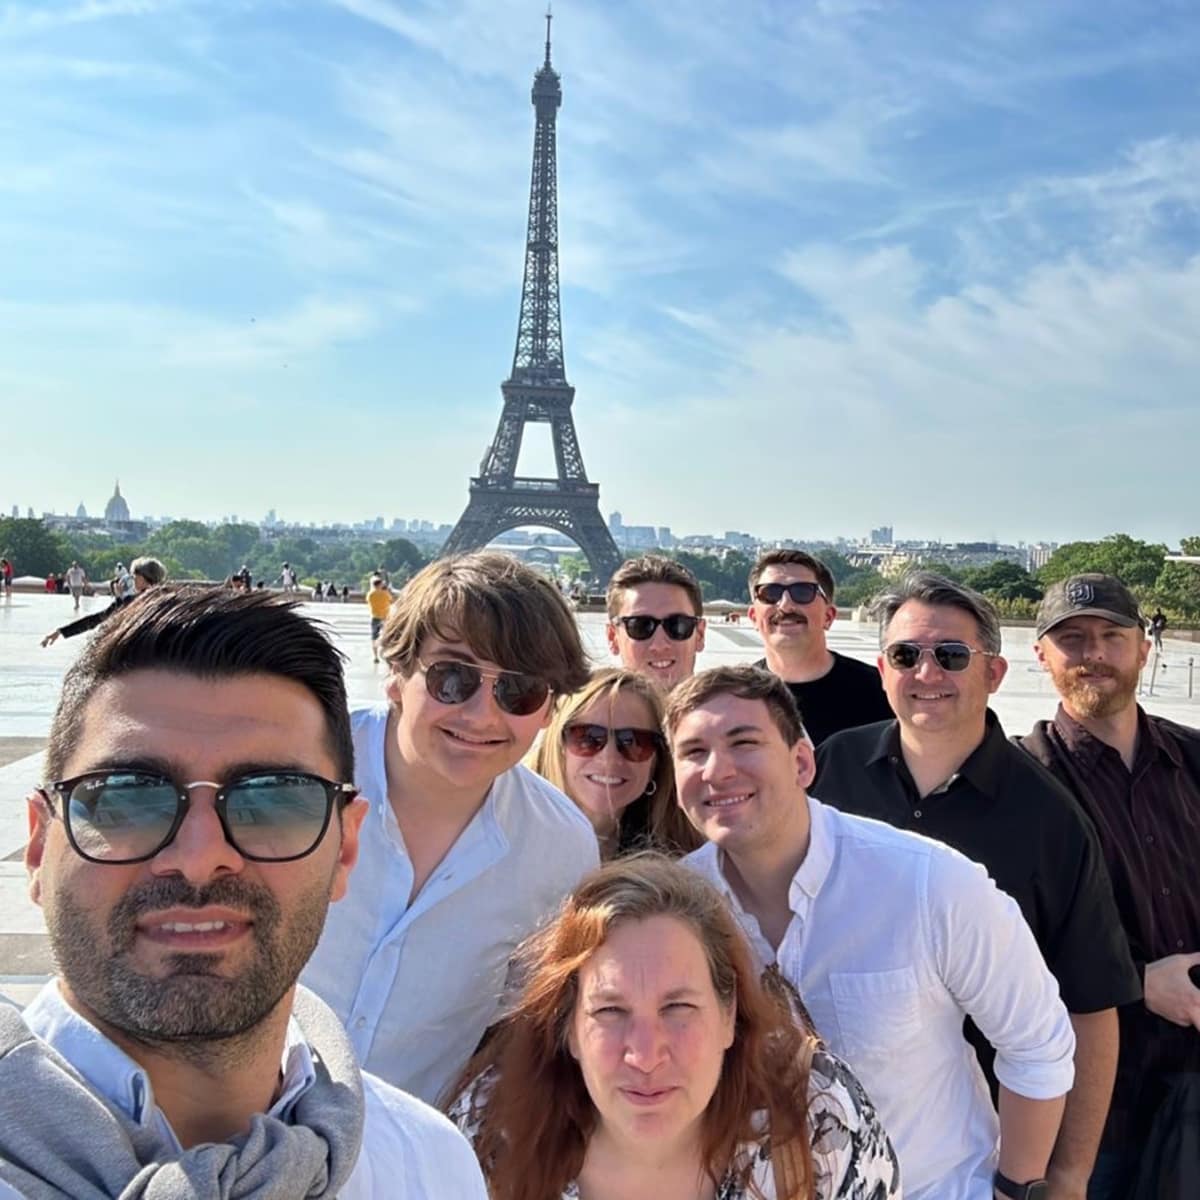 Angelia Keever and her peers from Embry-Riddle Worldwide visiting Paris while studying abroad in Europe. (Photo: Angelia Keever)